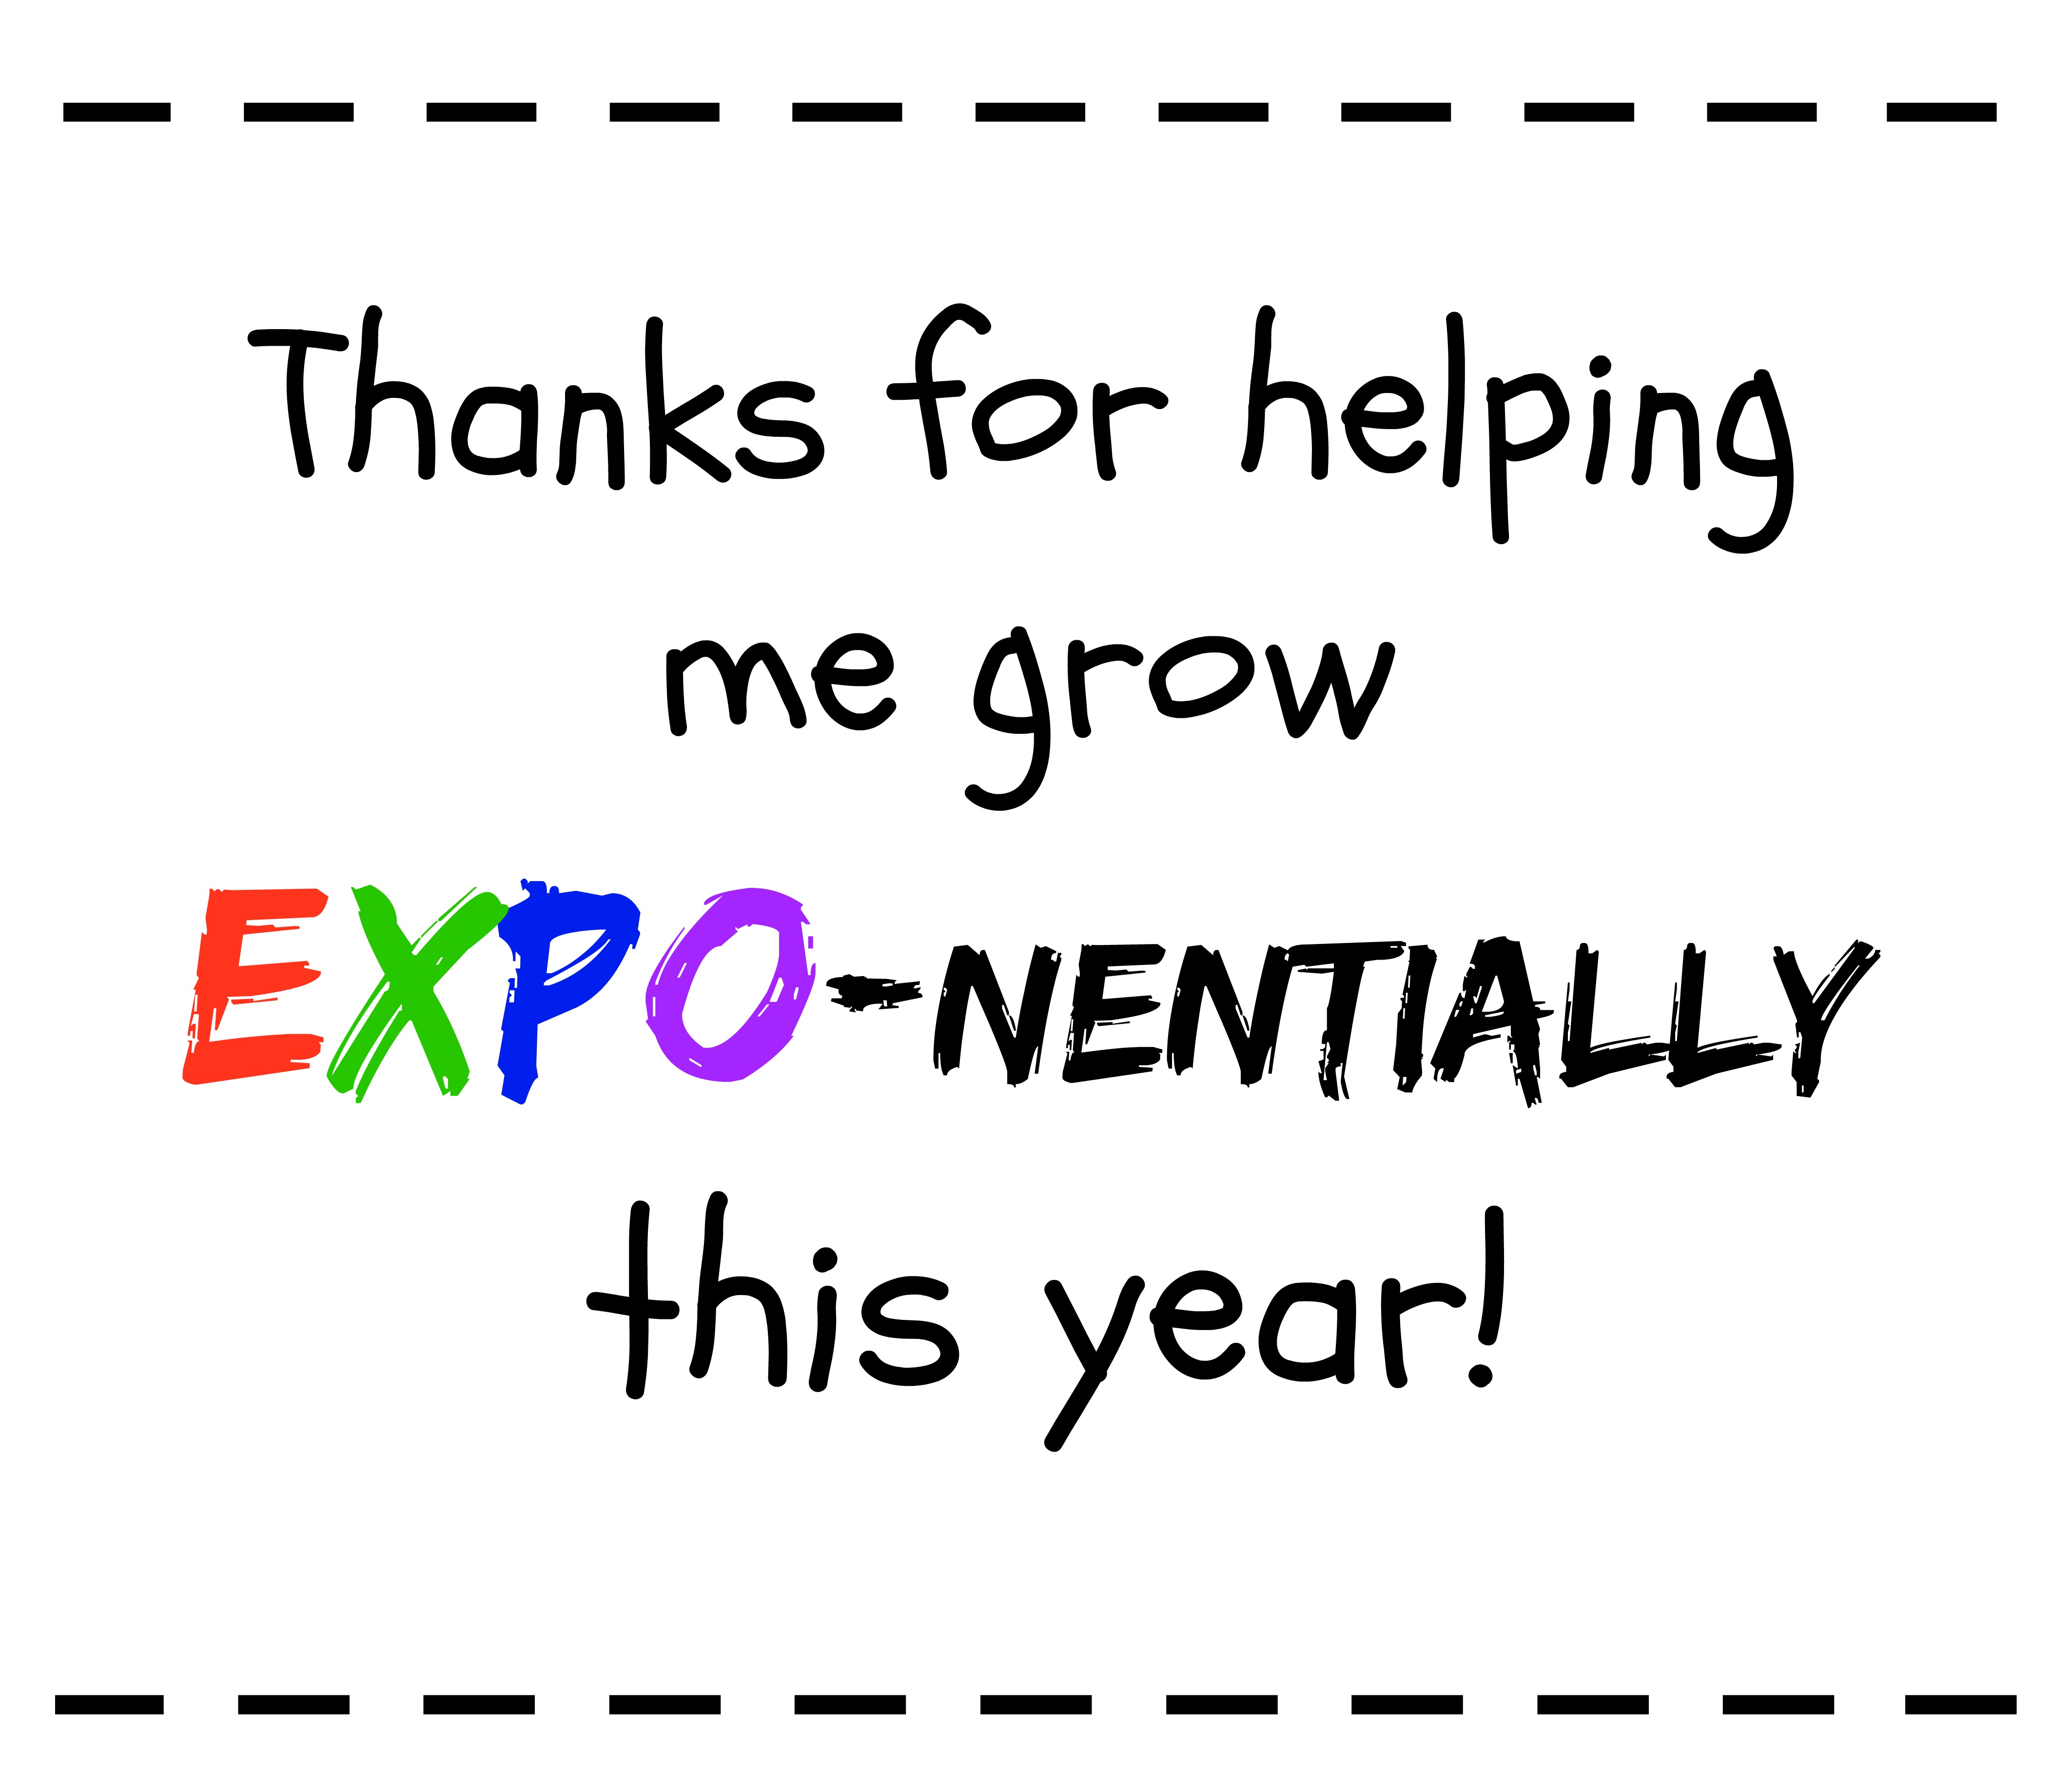 https://smashedpeasandcarrots.com/wp-content/uploads/2018/05/Thank-for-helping-me-Expo-nentially-.jpg